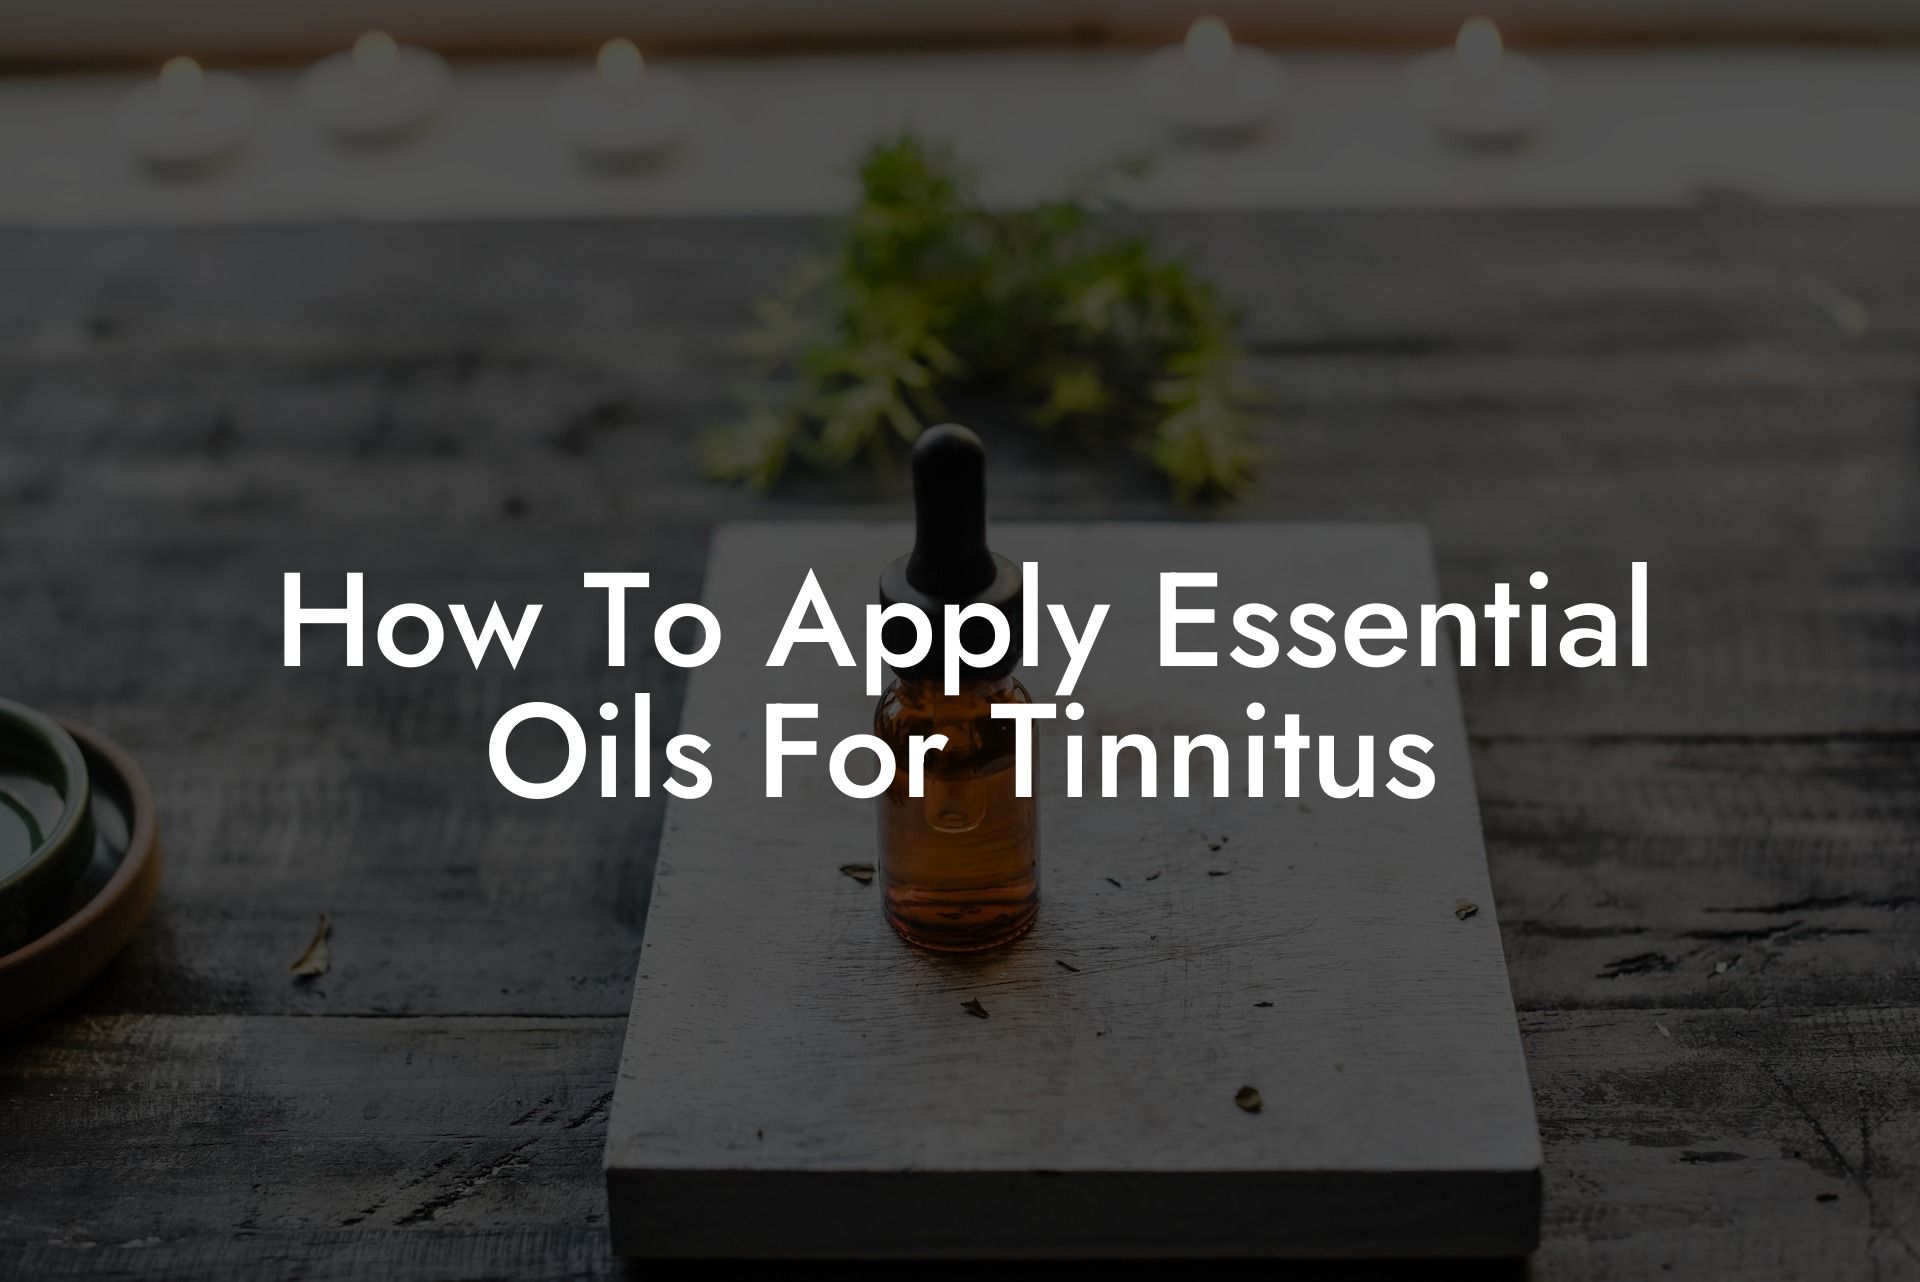 How To Apply Essential Oils For Tinnitus